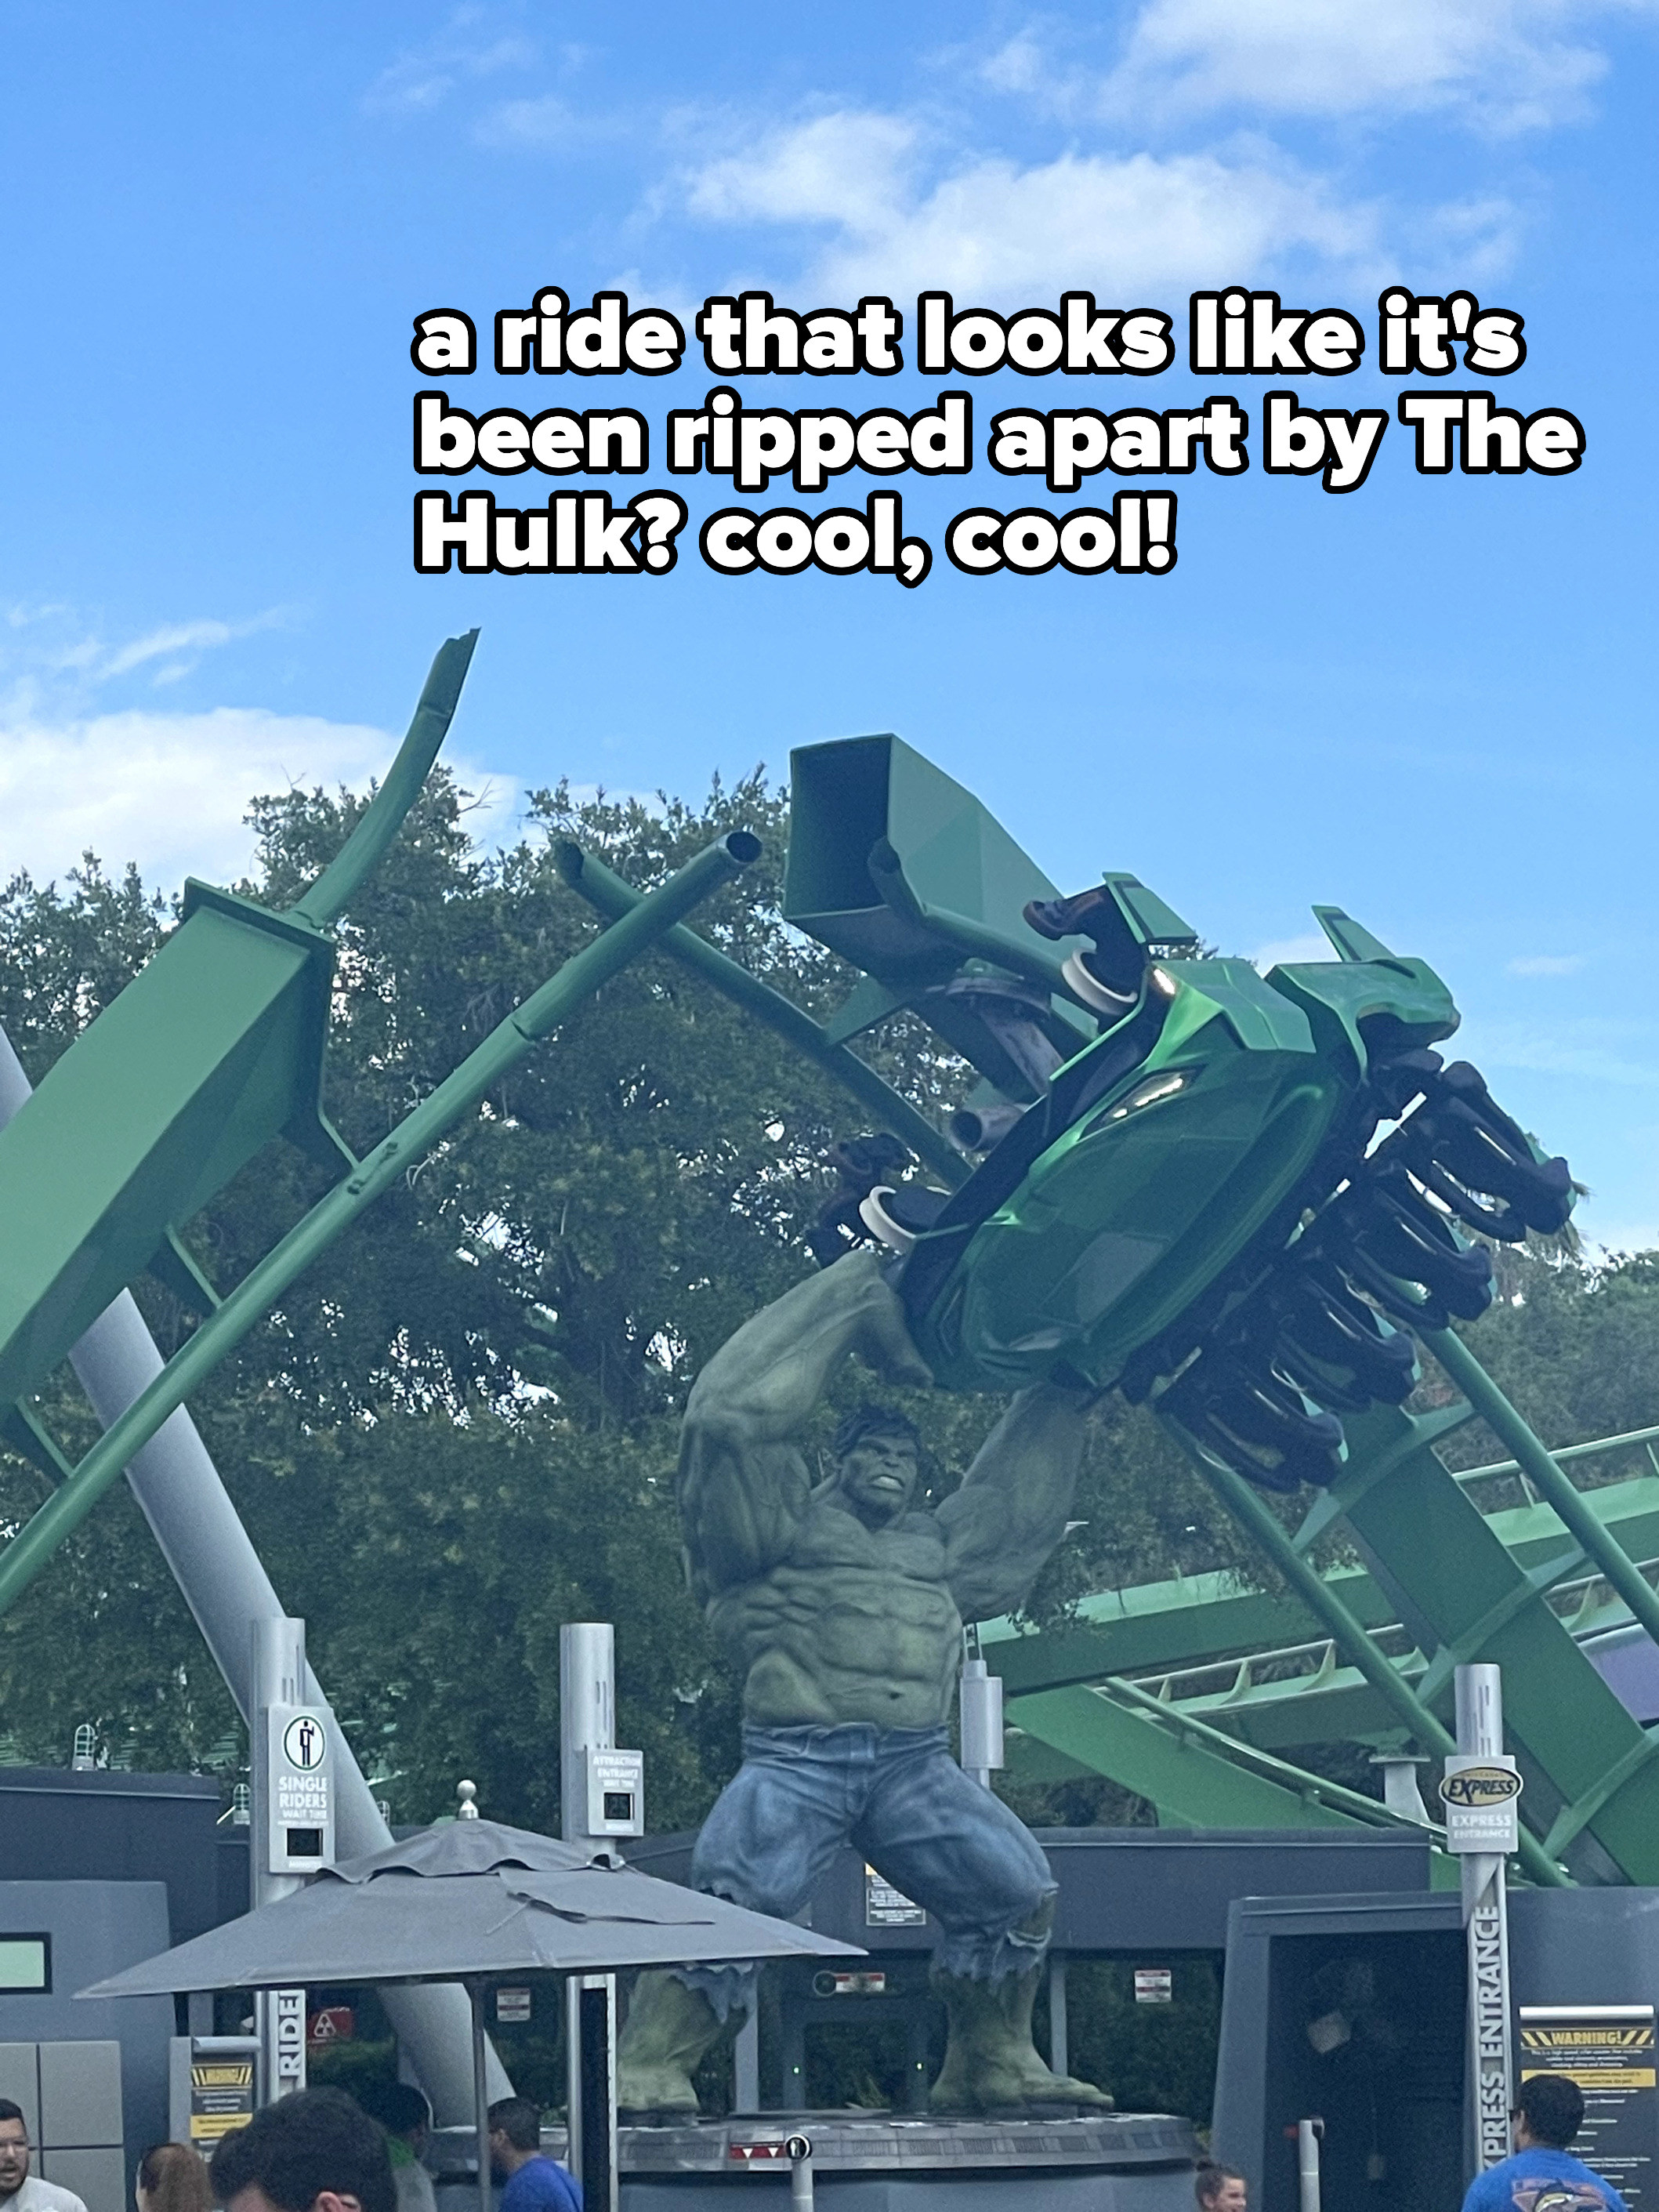 A photo of the The Hulk seemingly ripping apart the rails of a ride